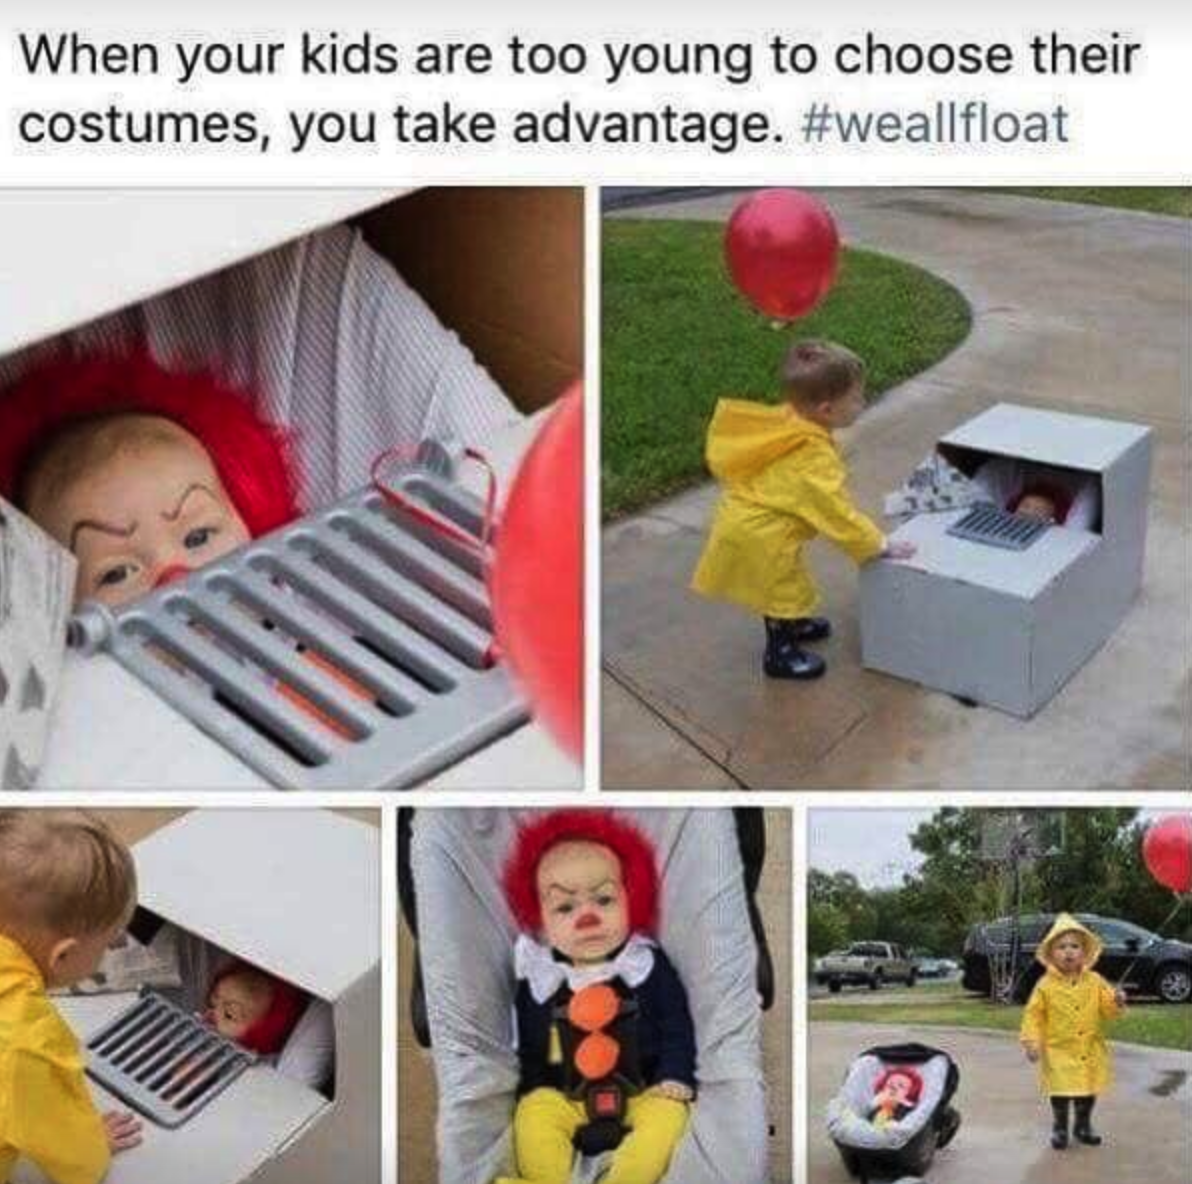 Well, babies *are* scary